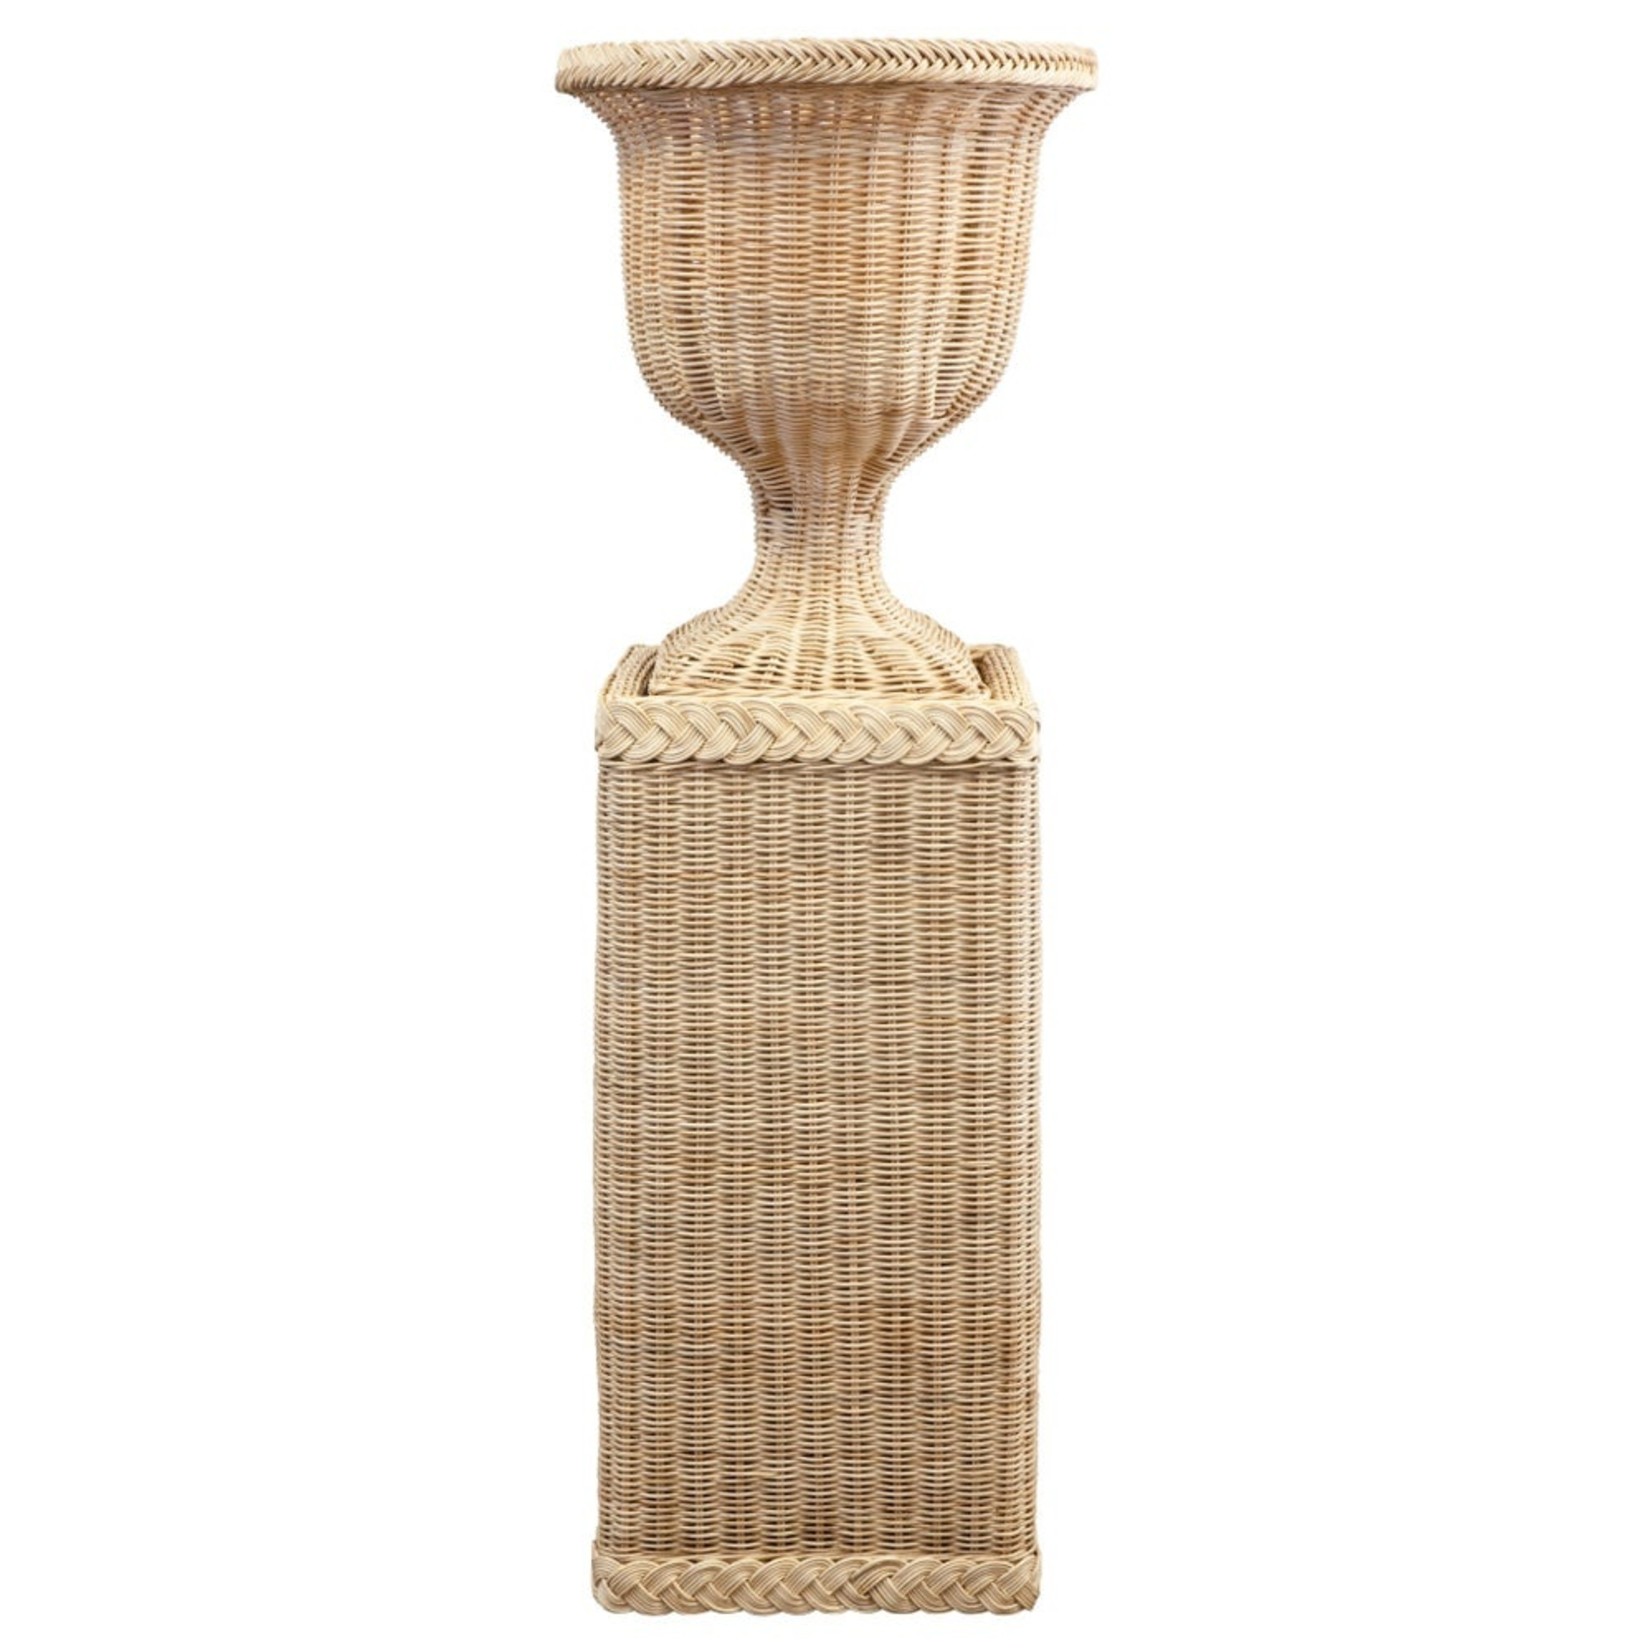 Mainly Baskets Small Braided Square Pedestal